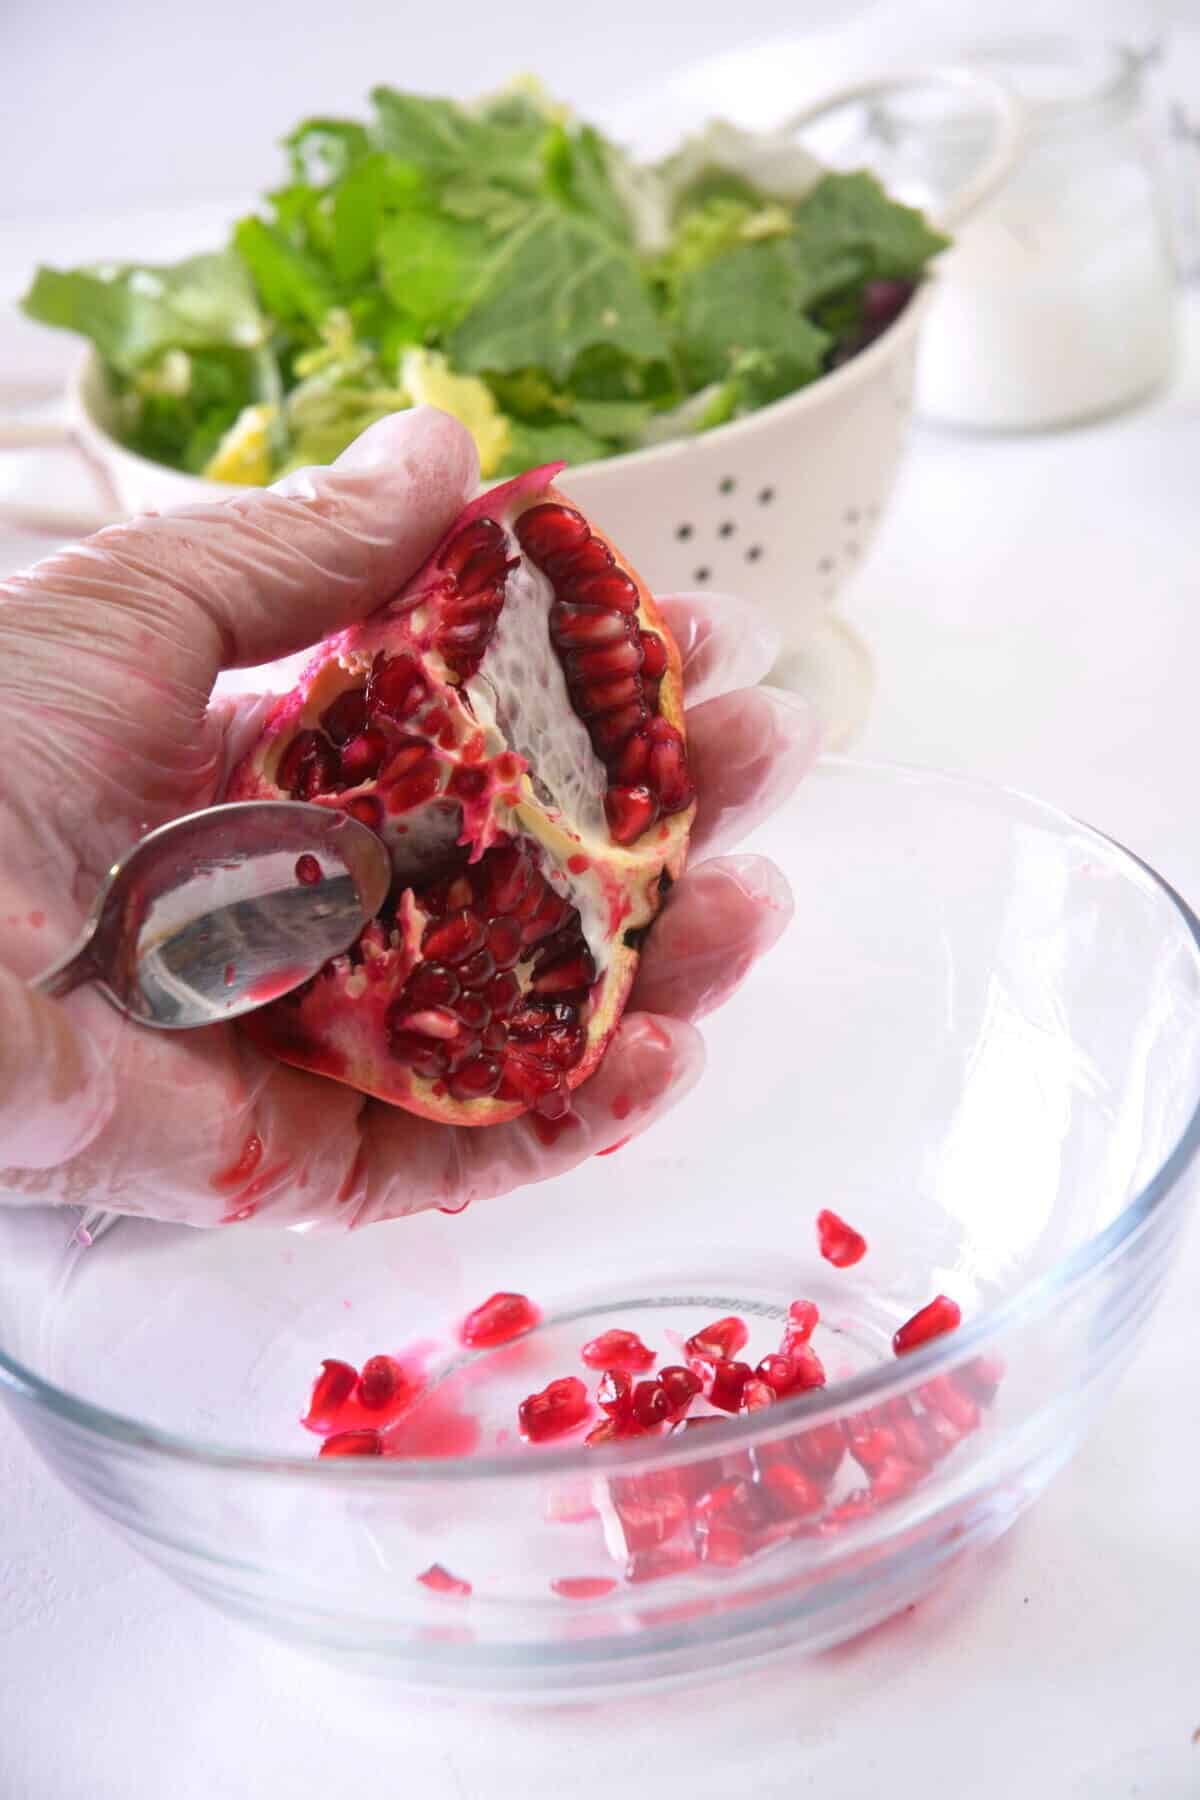 Pomegranate with seeds in a small glass bowl.